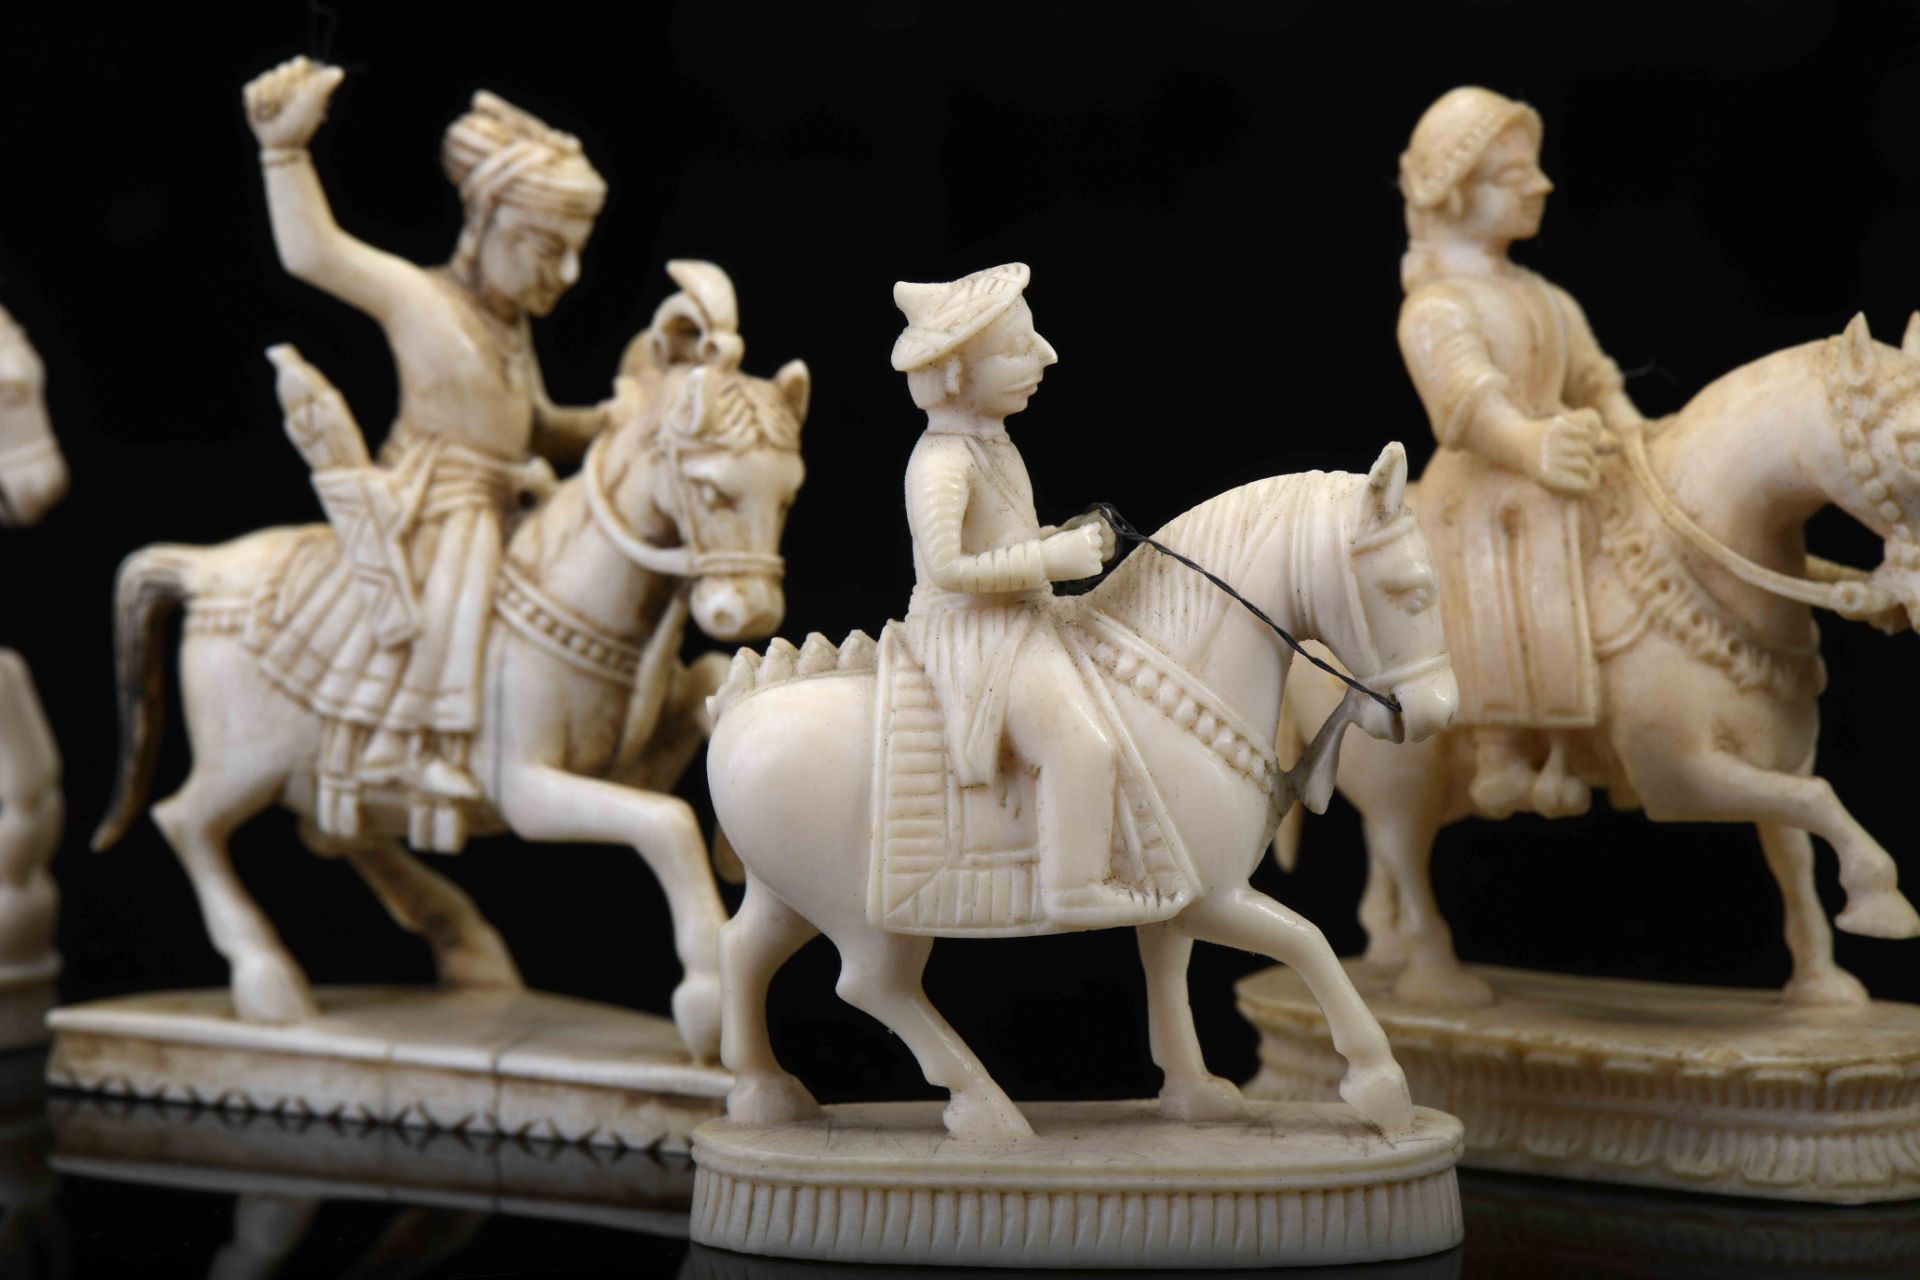 Chess Pieces “Knights” - Male figures on horseback - Image 2 of 5